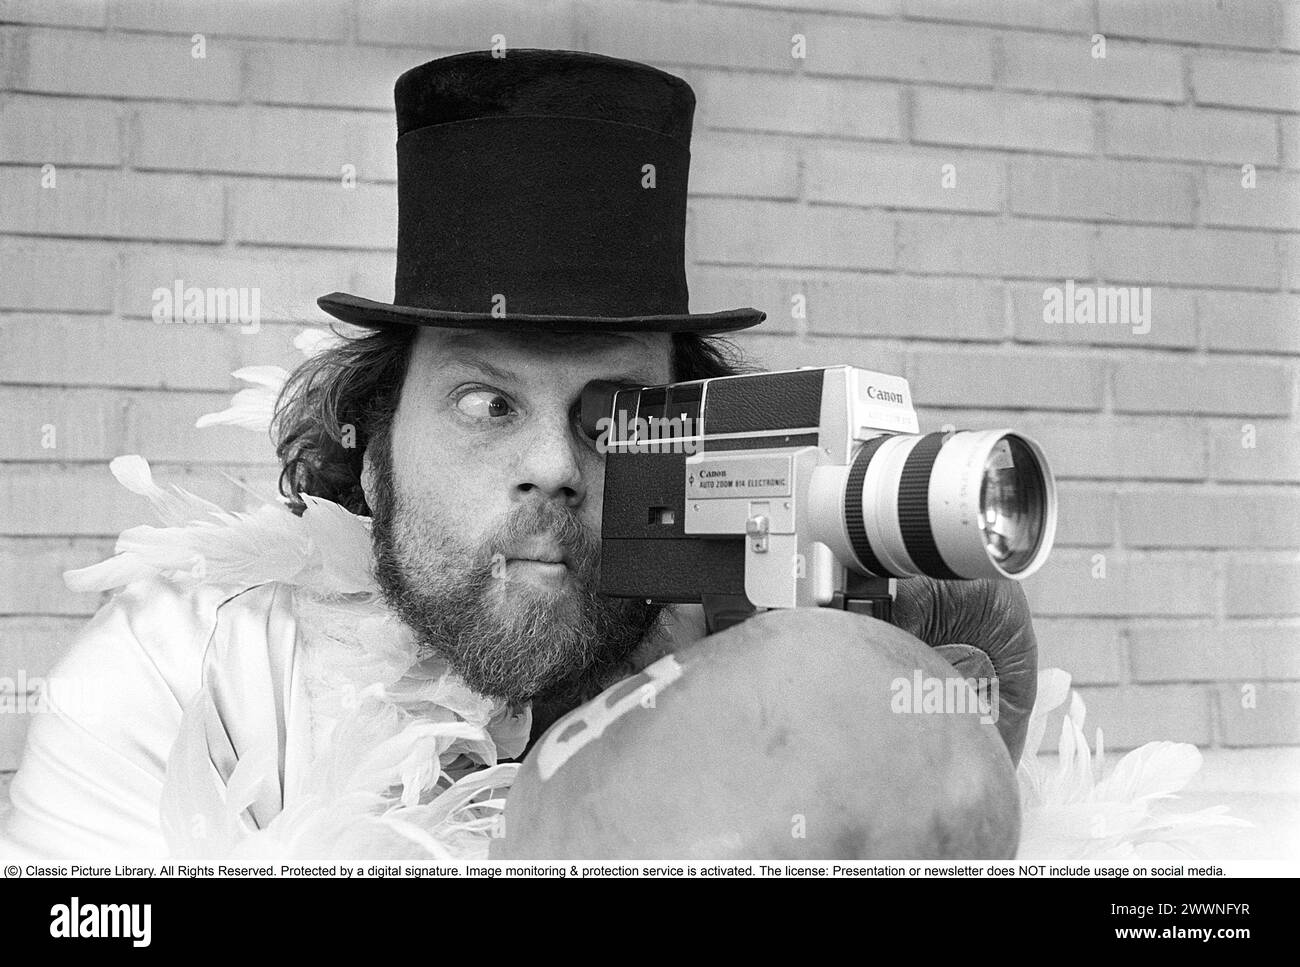 In the 1970s. A man is filming with a amateur film camera. The film was then developed and shown on a film projector on a fold up screen at home. Ricky Bruch (1946-2011) Swedish track and field athlete. He was known for being somewhat of a showman pictured here wearing boxing gloves, a feather boa and a cylinder hat.  1975 Stock Photo